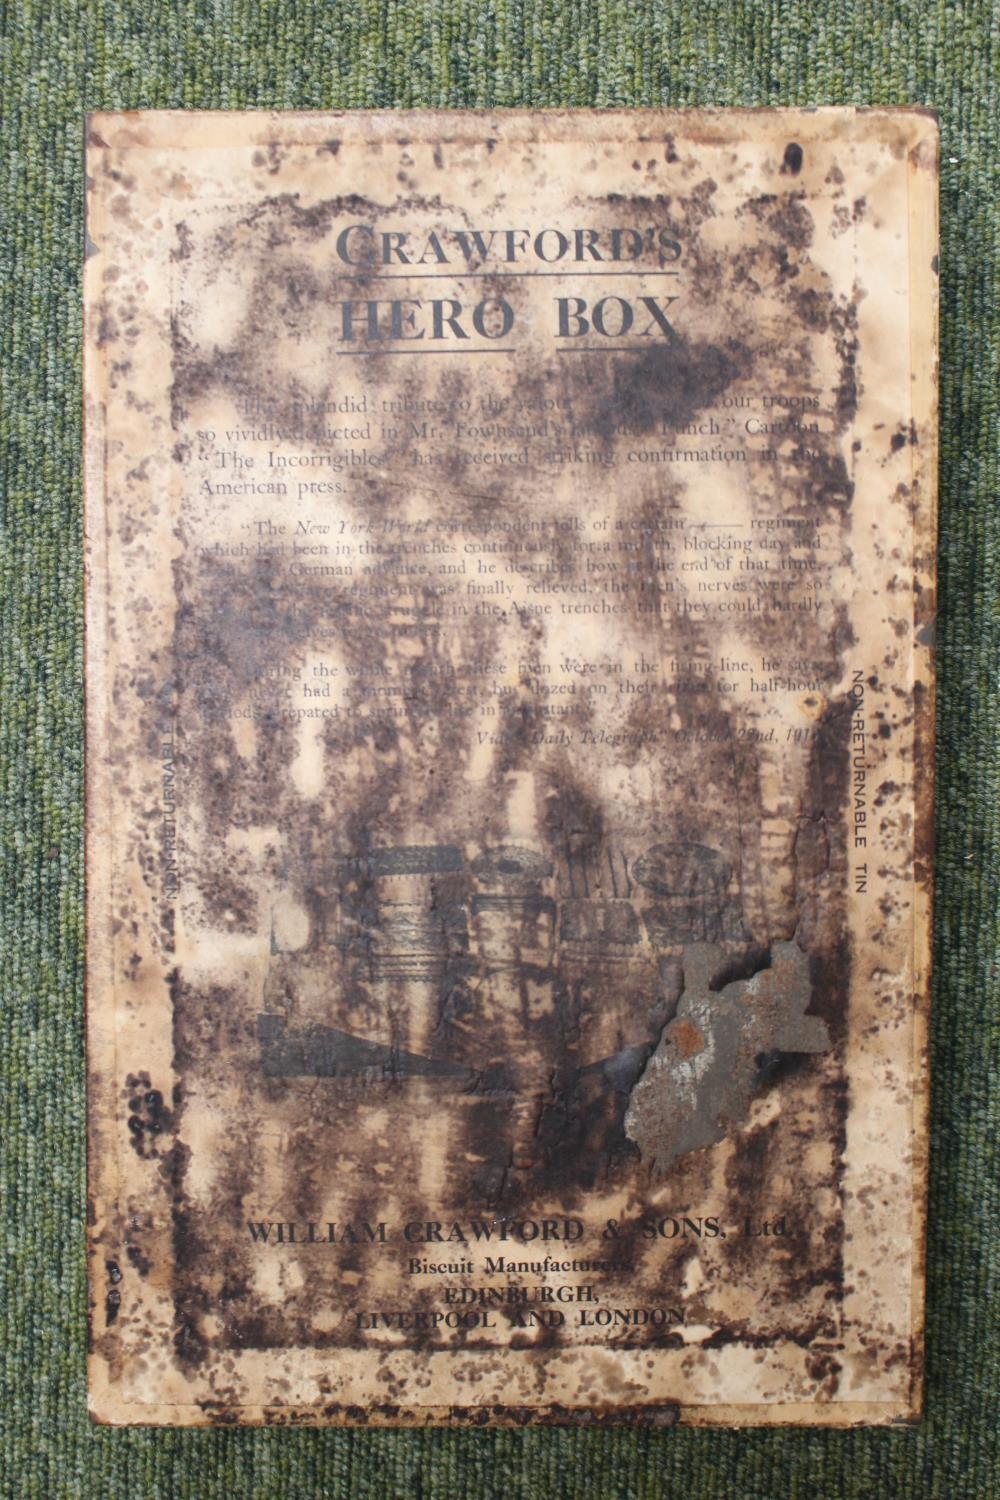 Vintage Crawfords Hero Box Biscuit Assortment and another Biscuit Tin - Image 3 of 3